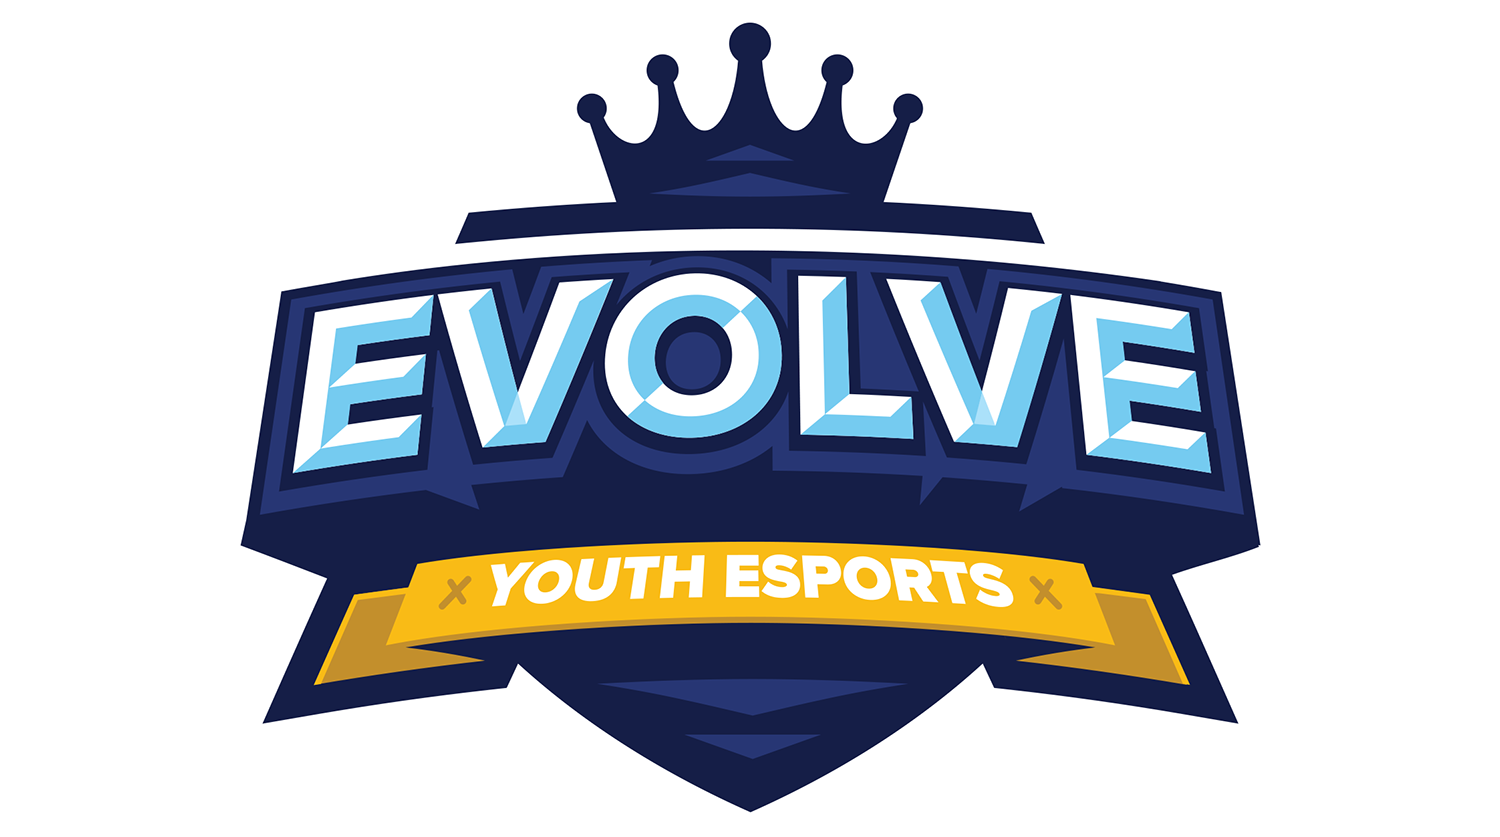 Evolve Youth Esports - Video game leagues for kids